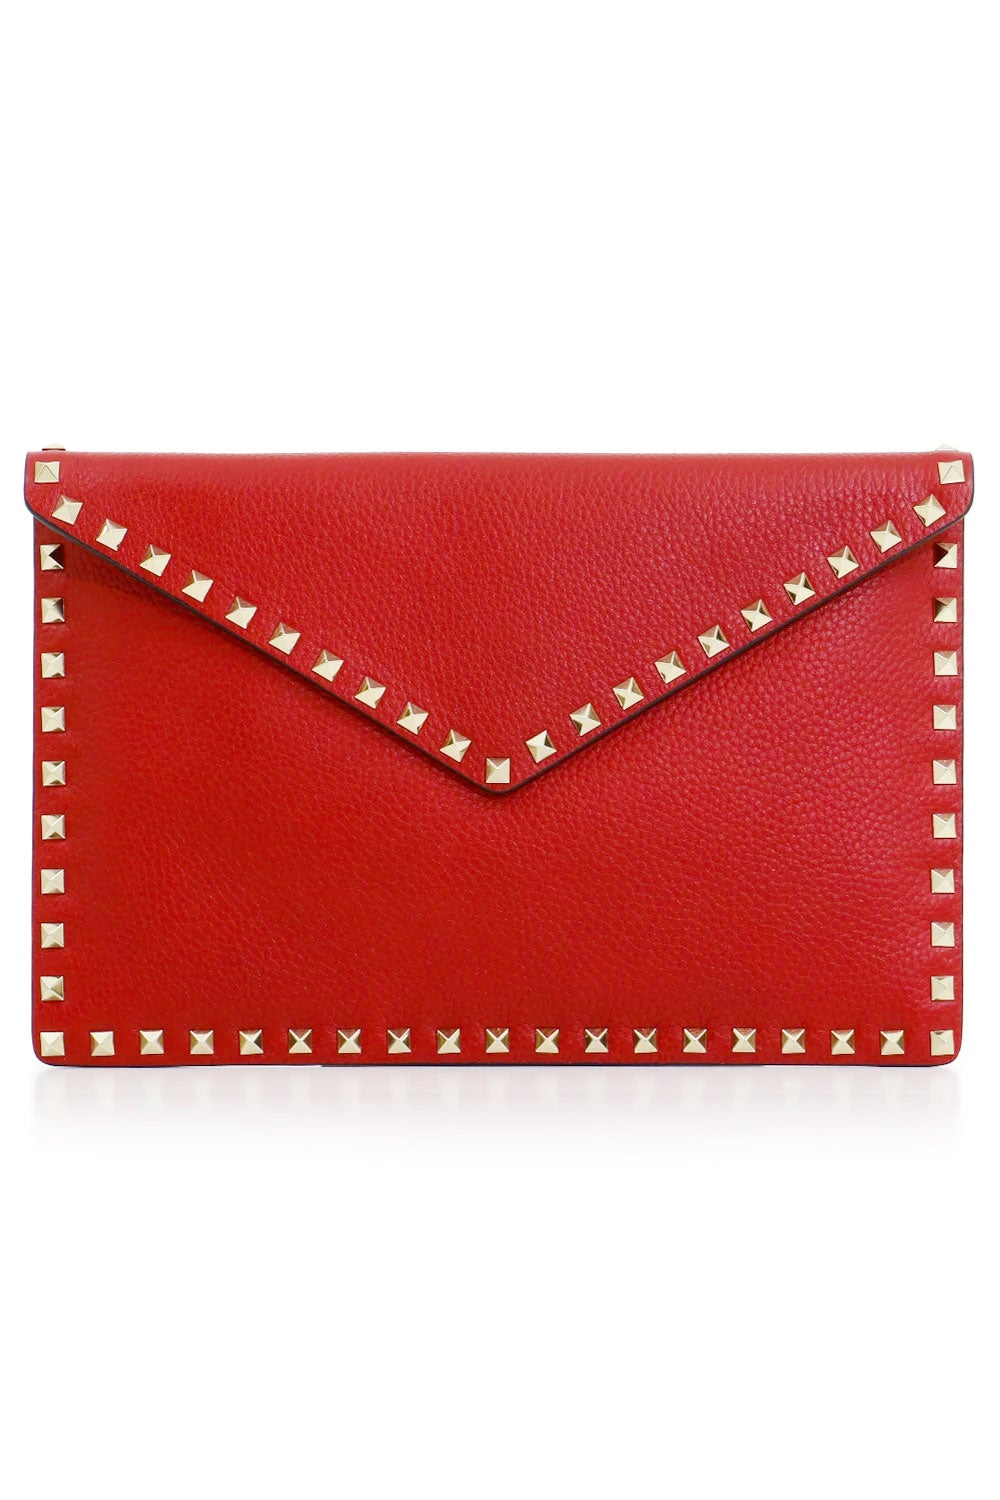 VALENTINO GARAVANI: Rockstud bag in grained leather with studs - Red